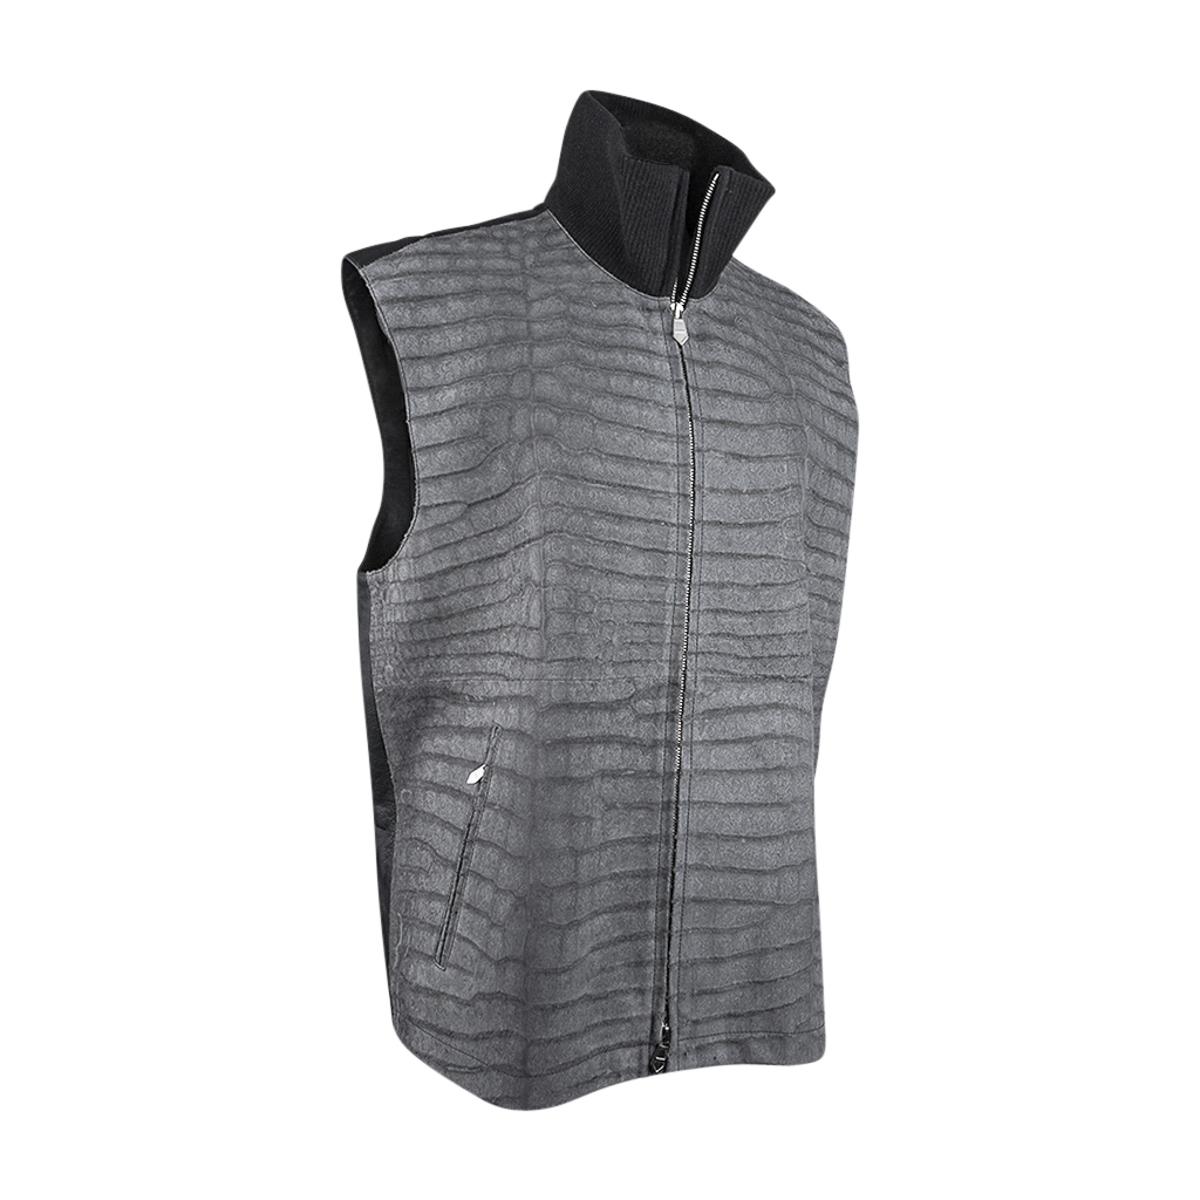 Mightychic offers an Hermes Men's vest featured in grey sueded porosus Crocodile.
This very rare and limited edition Hermes vest has a zip closure with two angled zip pockets with 
palladium pulls.
Front is rich sueded porosus and the rear is grey